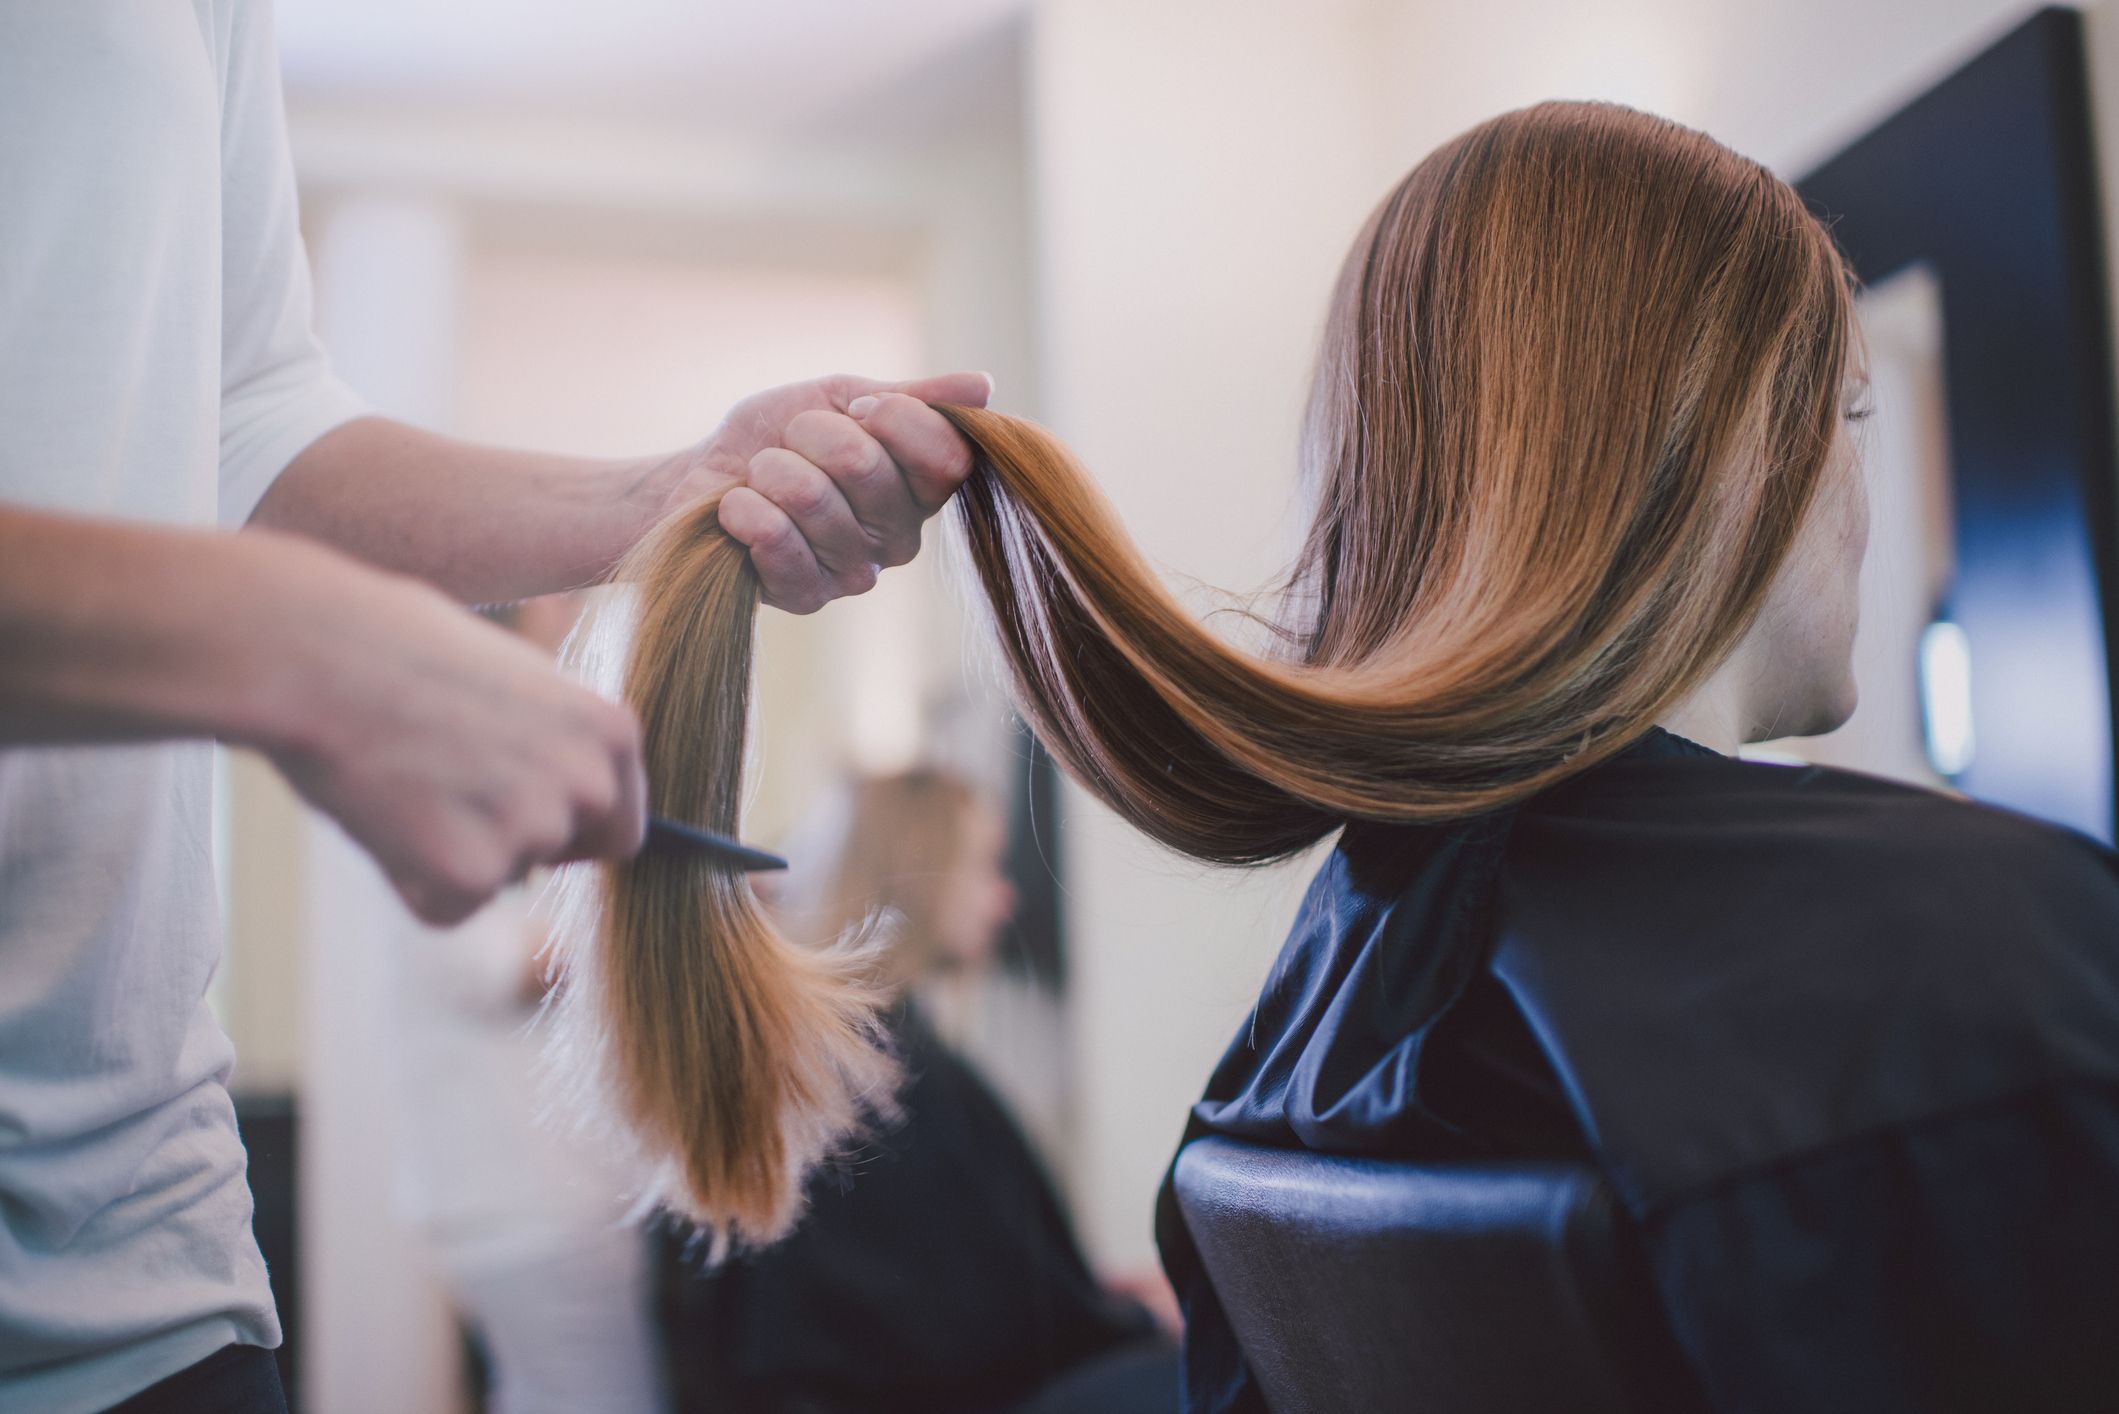 How Often Should You Cut Your Hair? Here's What Women Should Know